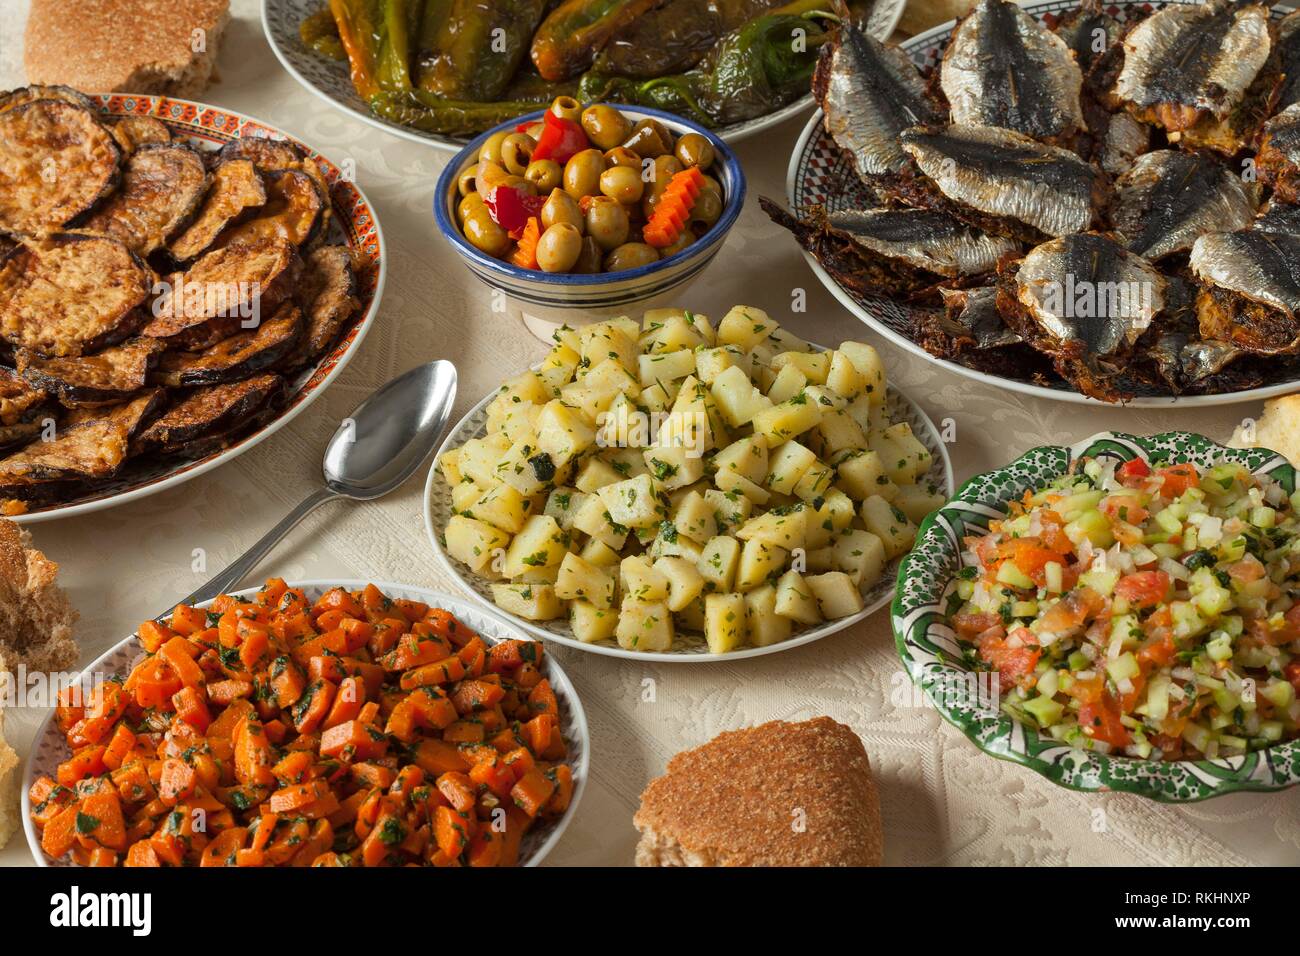 Moroccan meal with a variety of dishes with fresh cooked sardines, vegetables and bread. Stock Photo